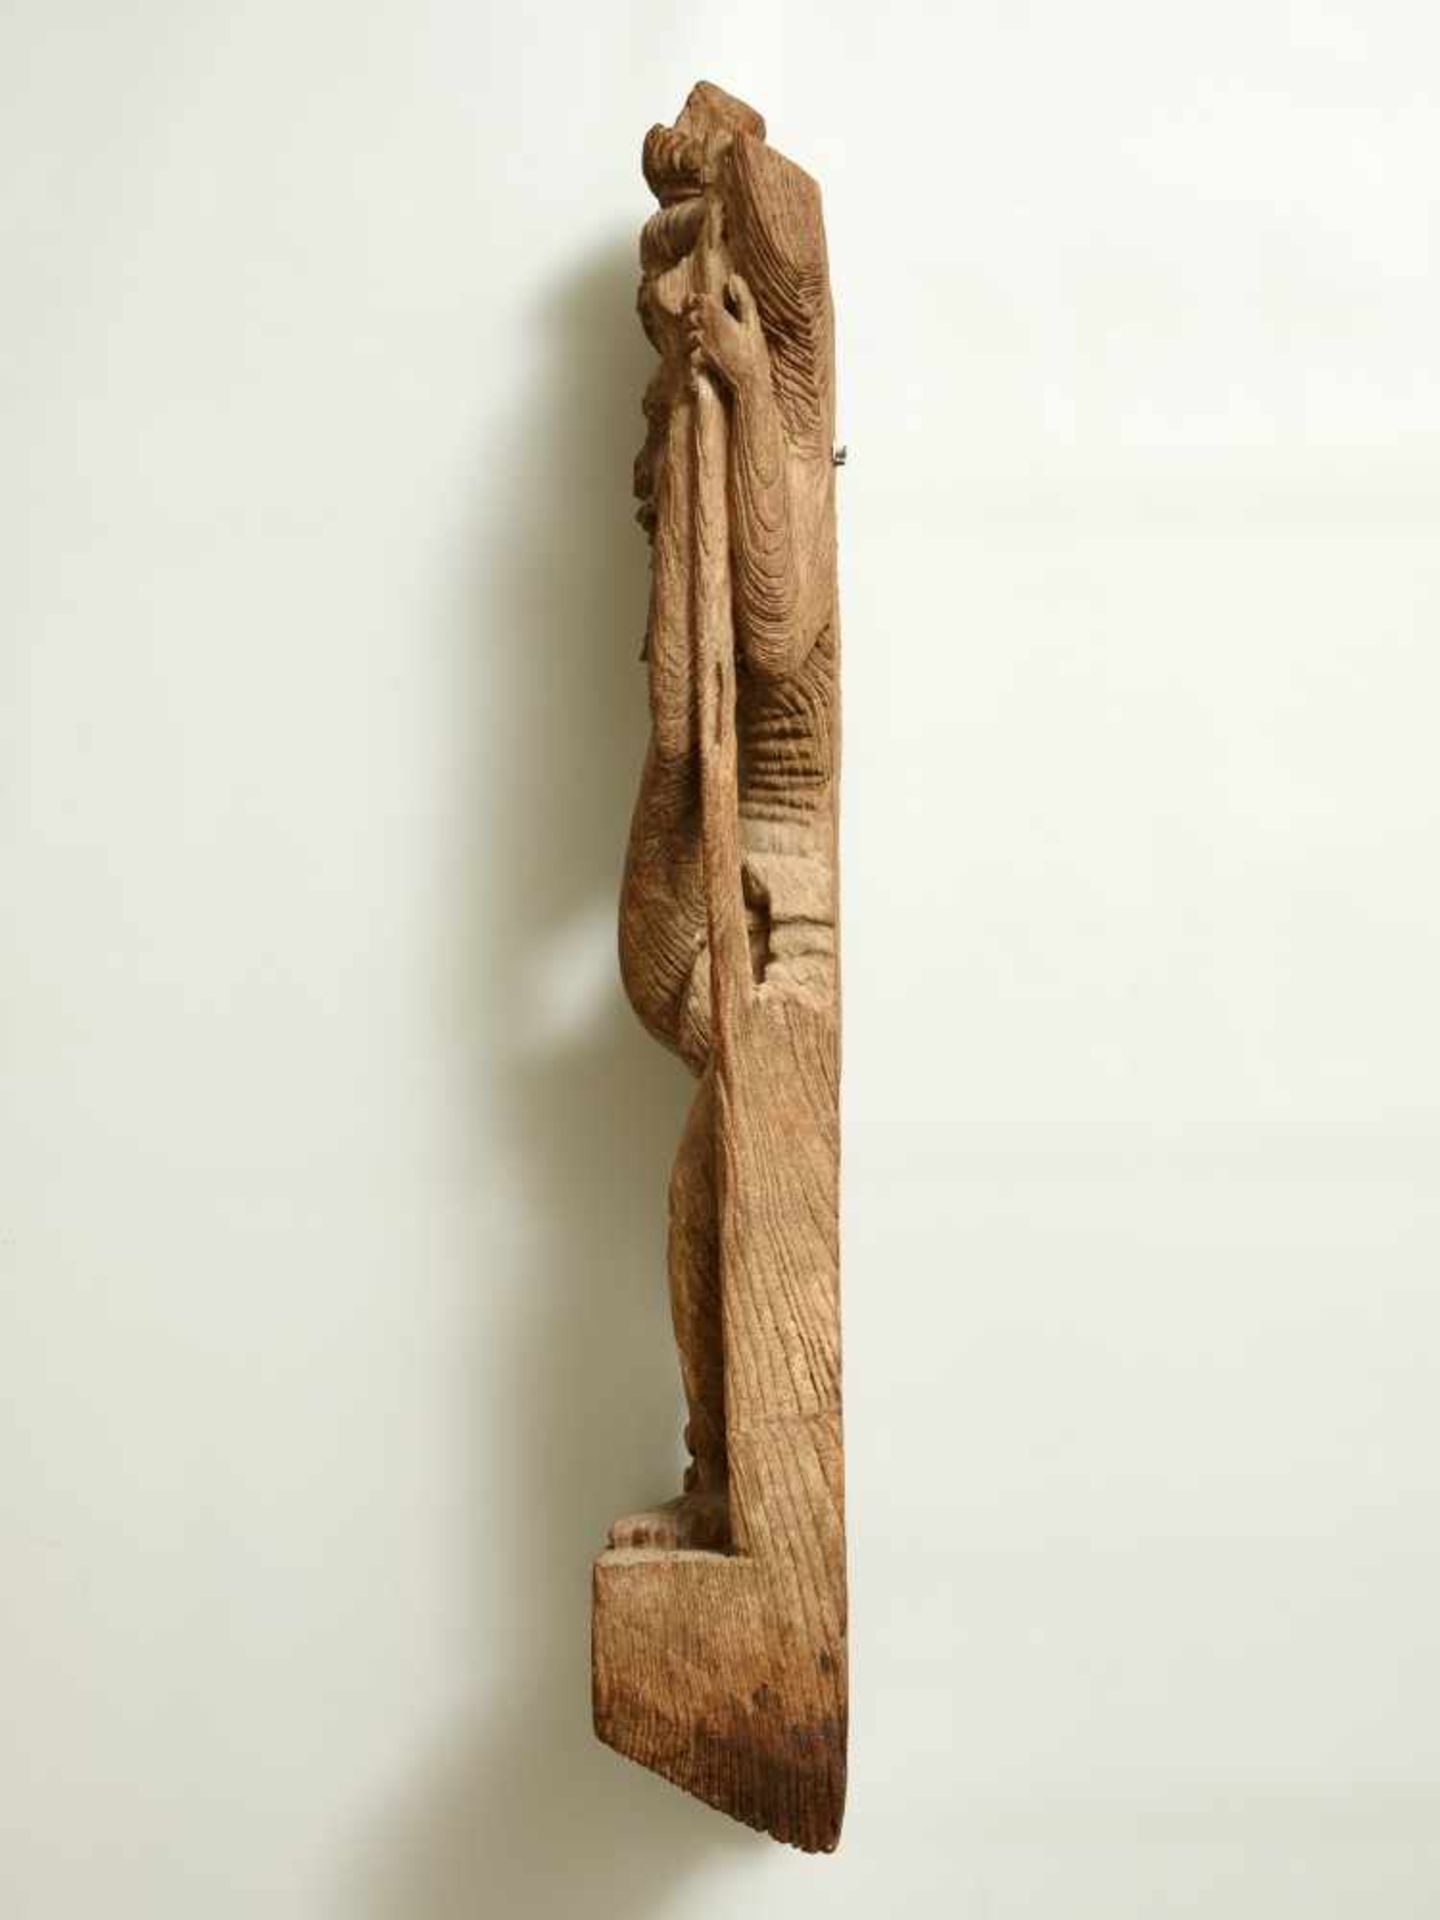 A LARGE AND RARE TAMIL NADU WOOD RELIEF OF THE WISE SAINT RSHIWood relief India, Tamil Nadu, approx. - Image 4 of 4